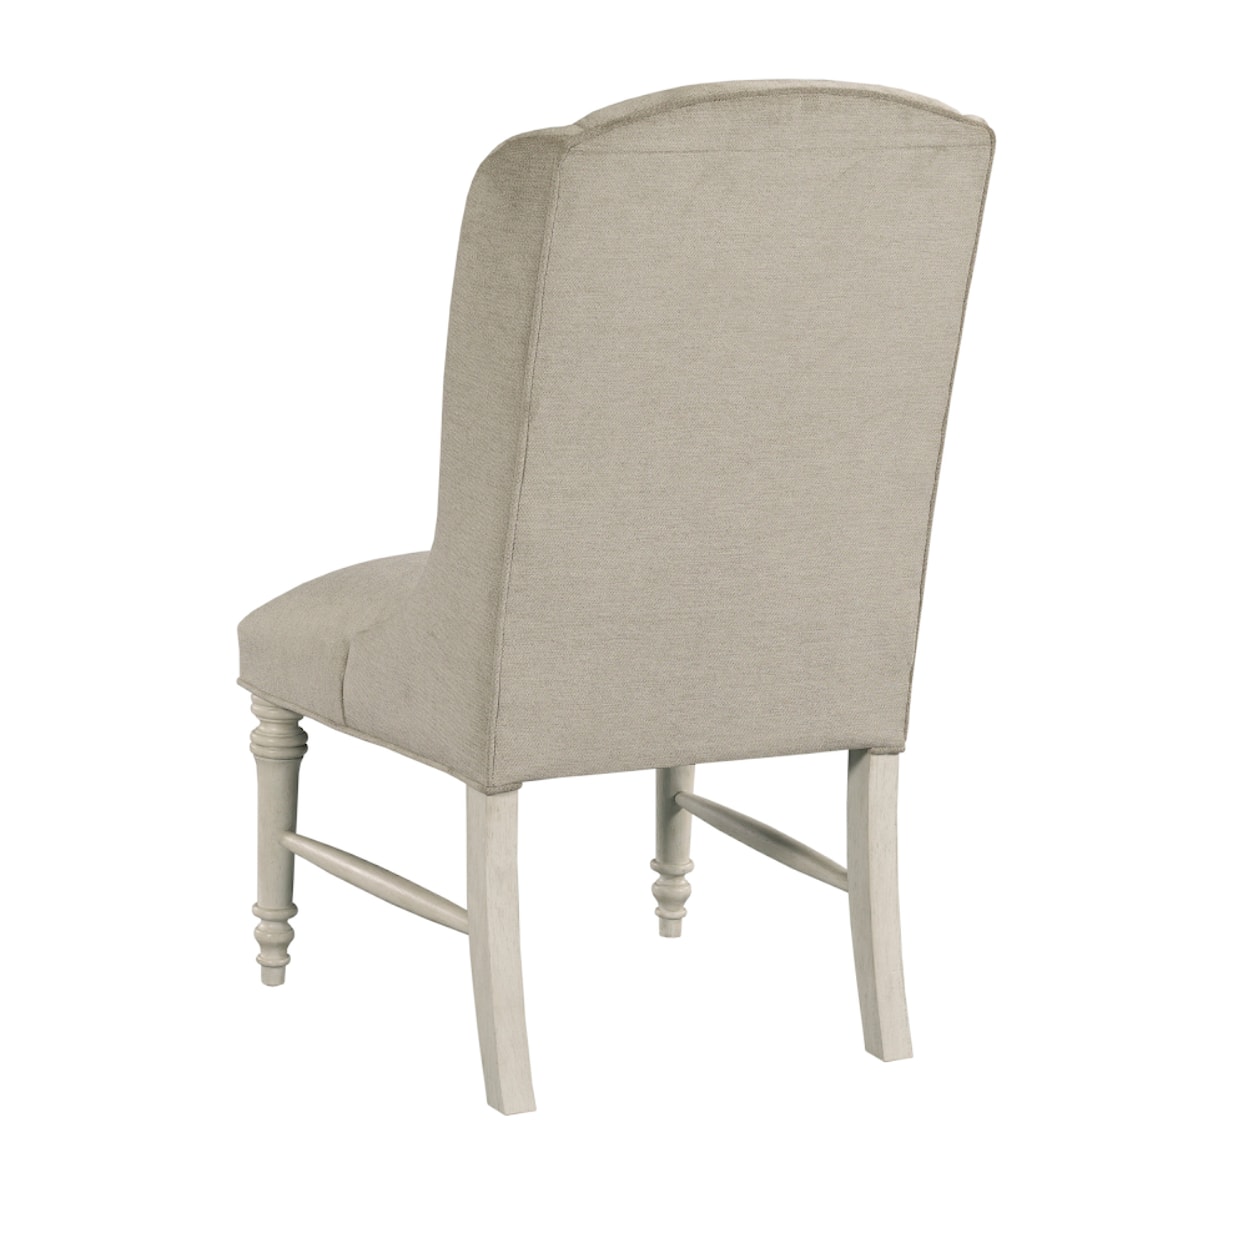 American Drew Grand Bay Parlor Upholstered Wing Back Chair